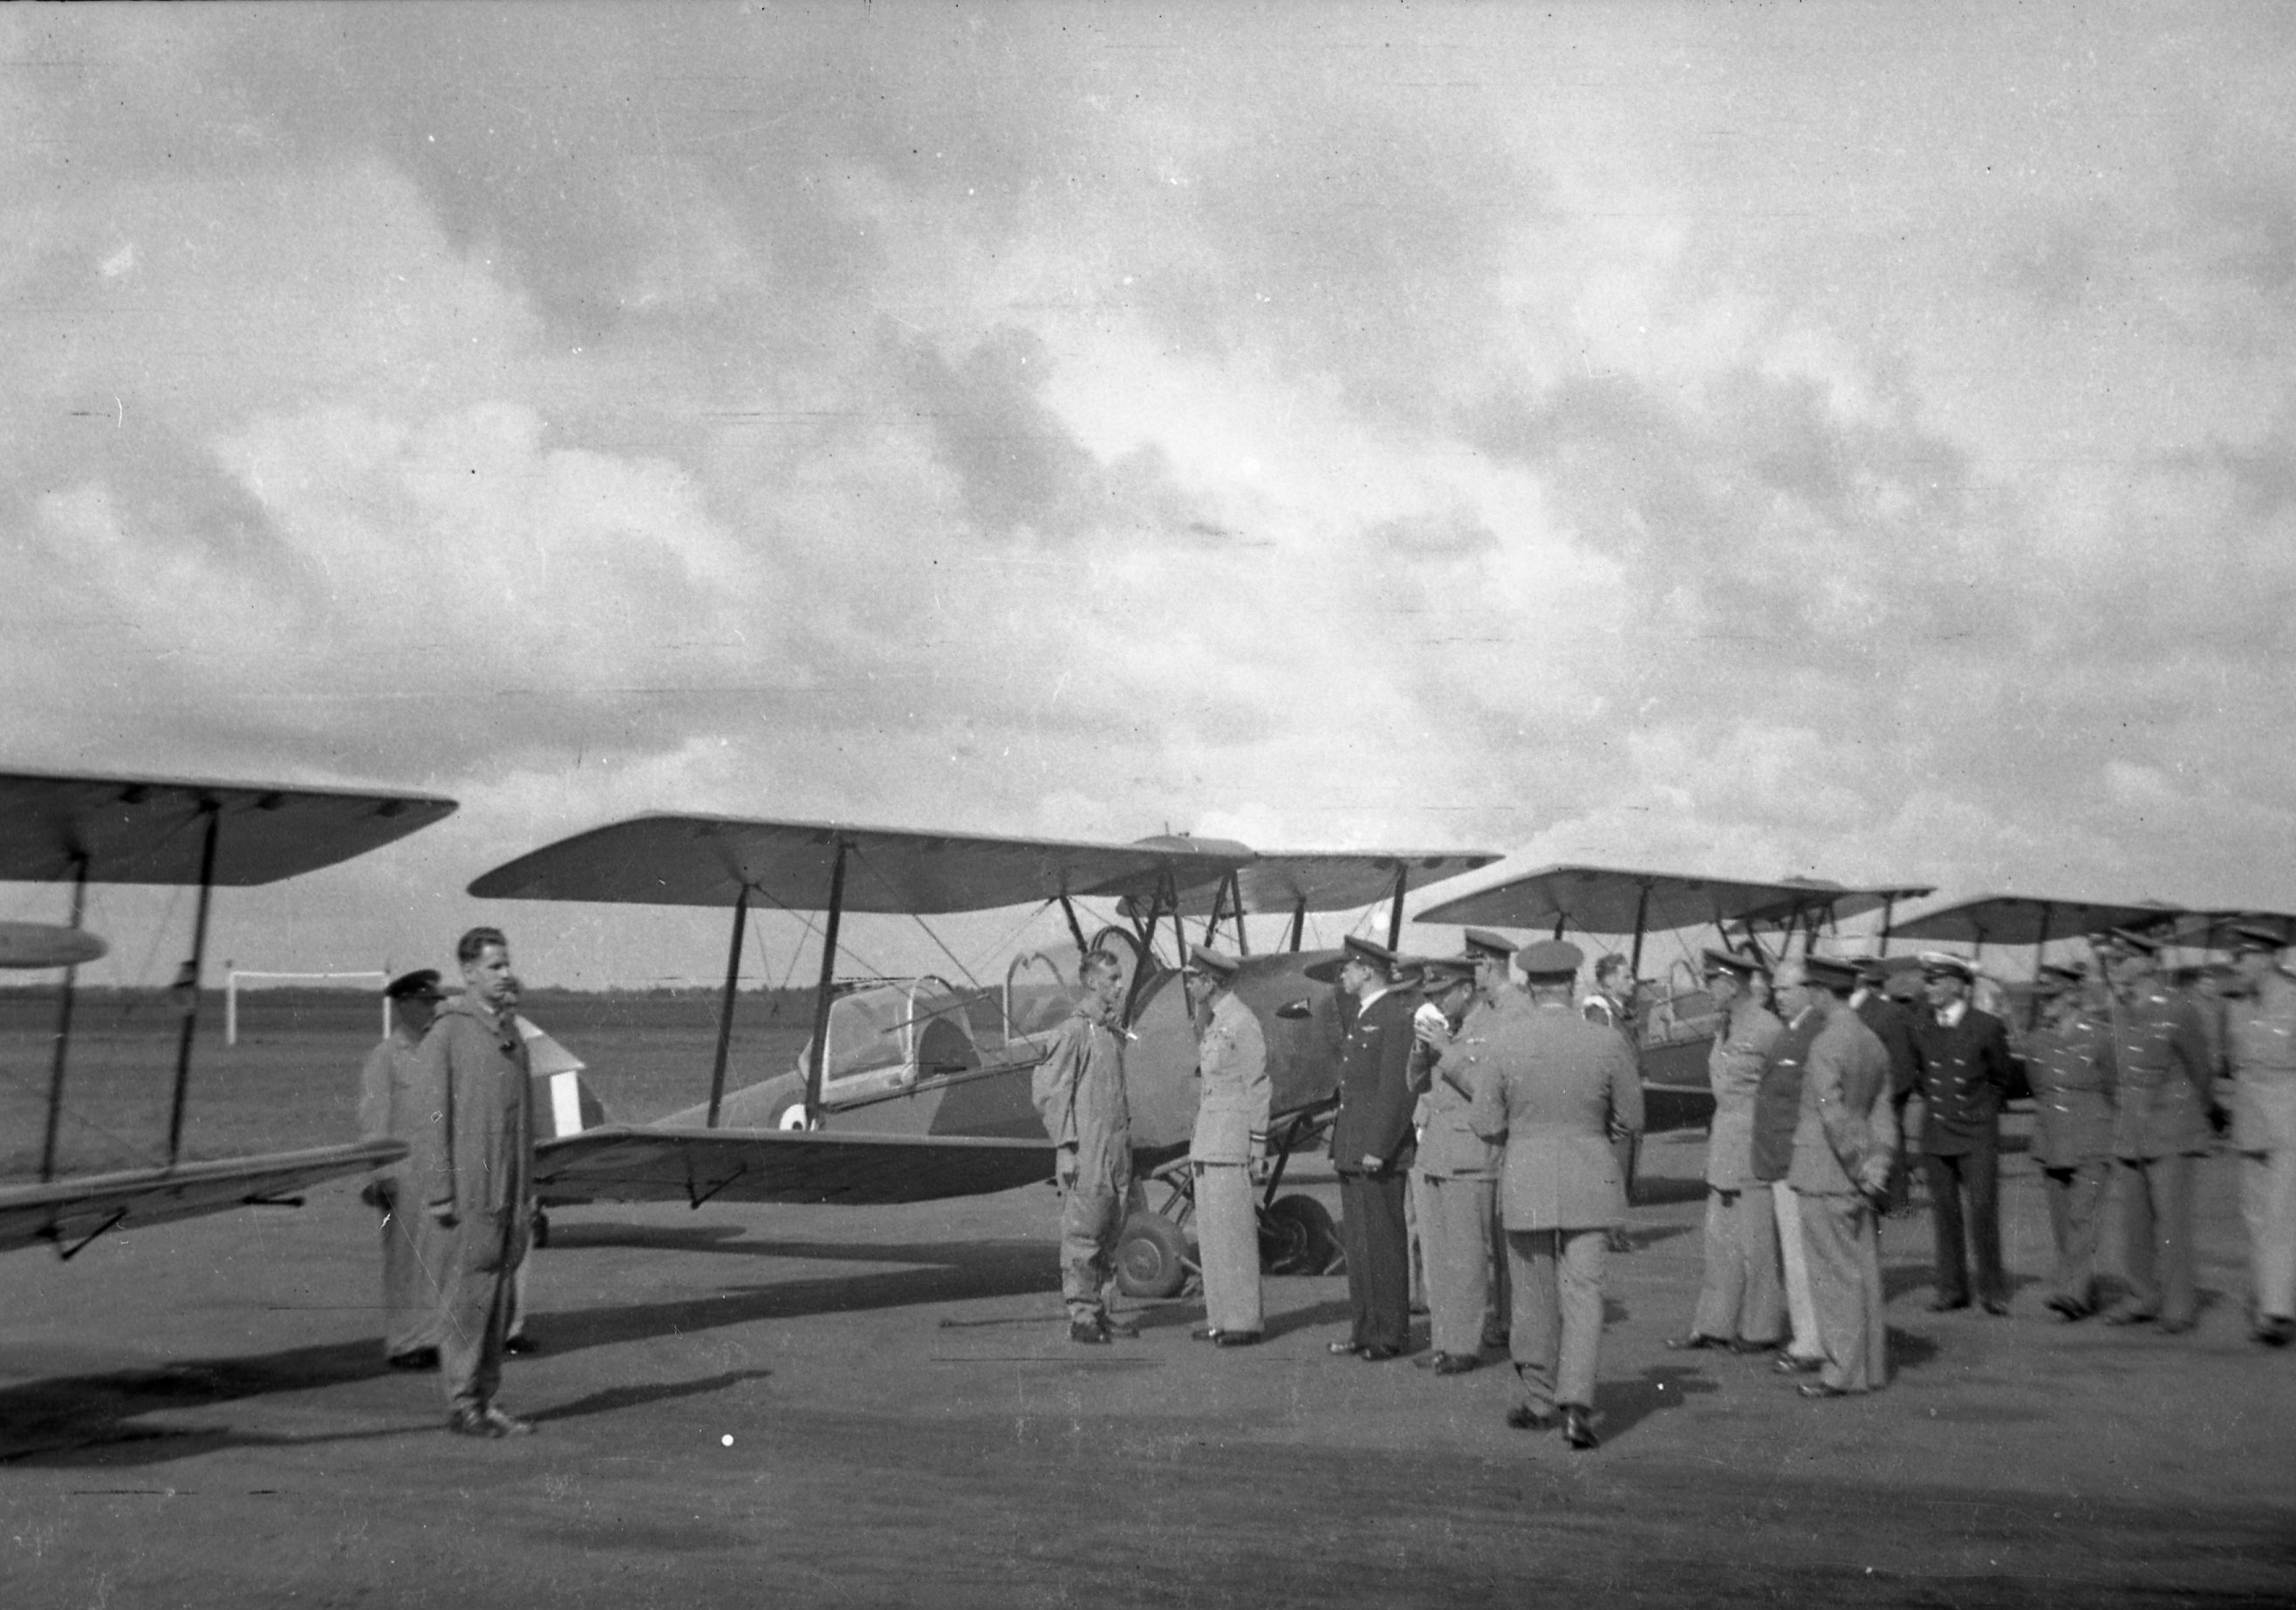 Frank Sorensen talking to the Duke of Kent, Prince George, Air Commodore, RAF Training Command at E.F.S.T., Fort William August 1941 - from negative